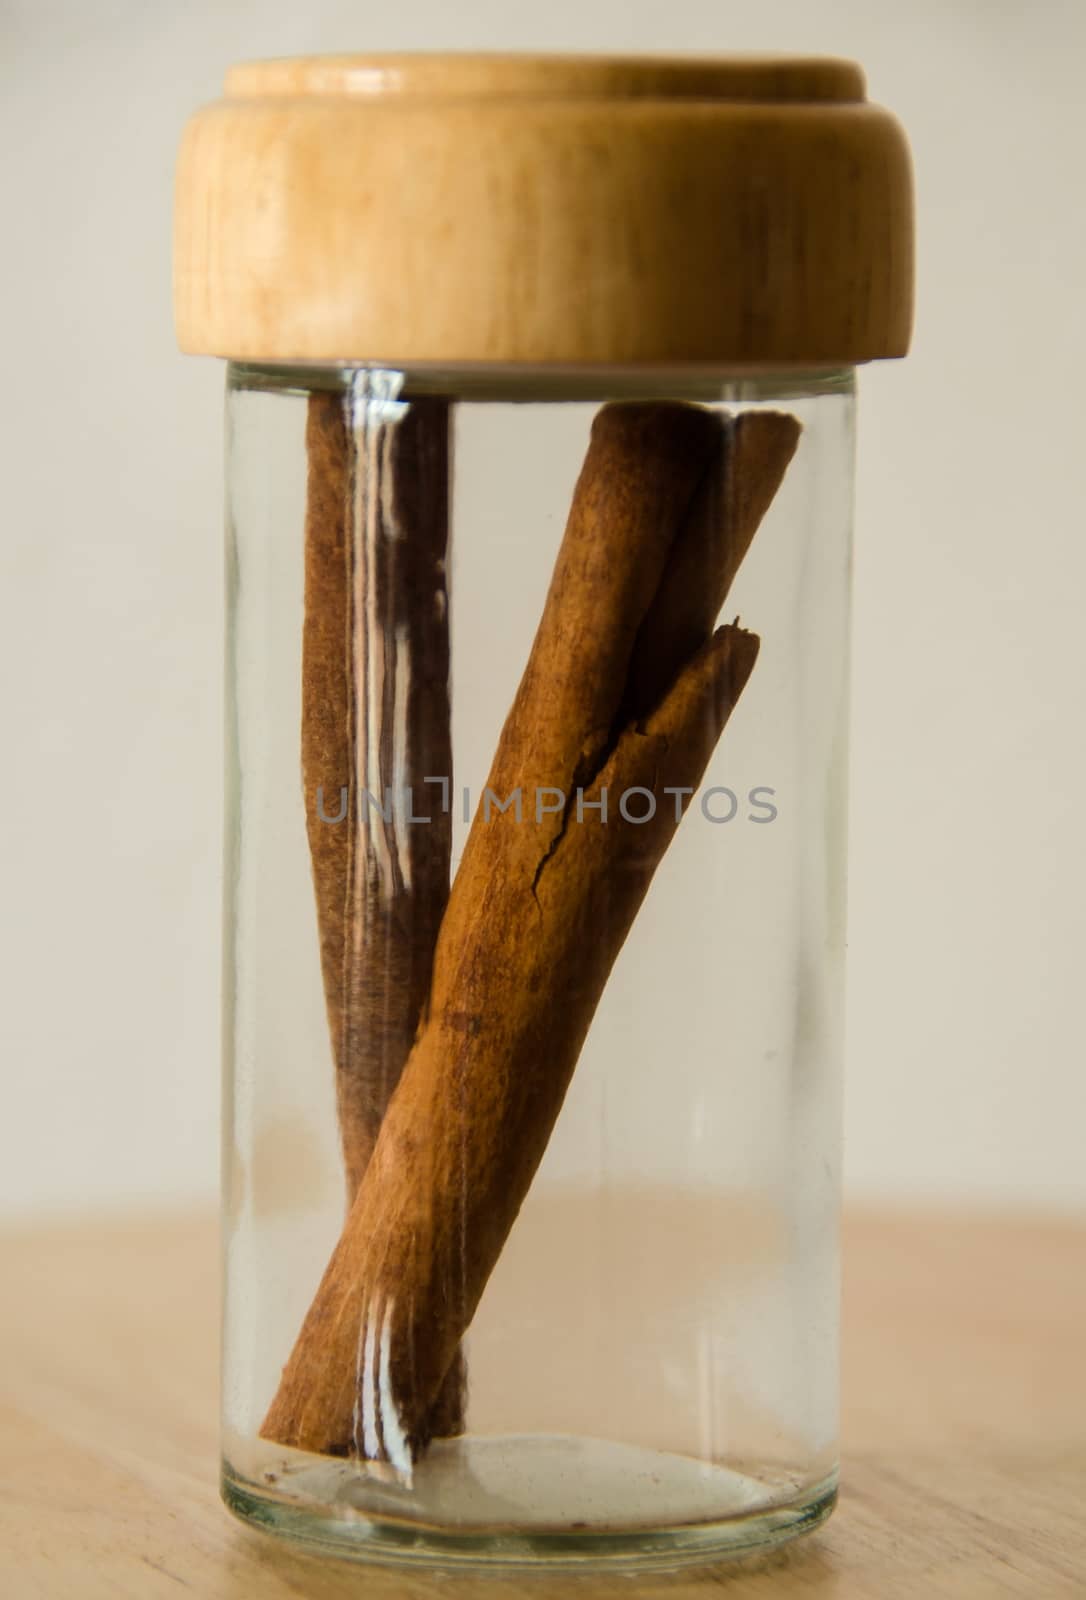 Cinnamon in the glass jar on wooden table, white background. 